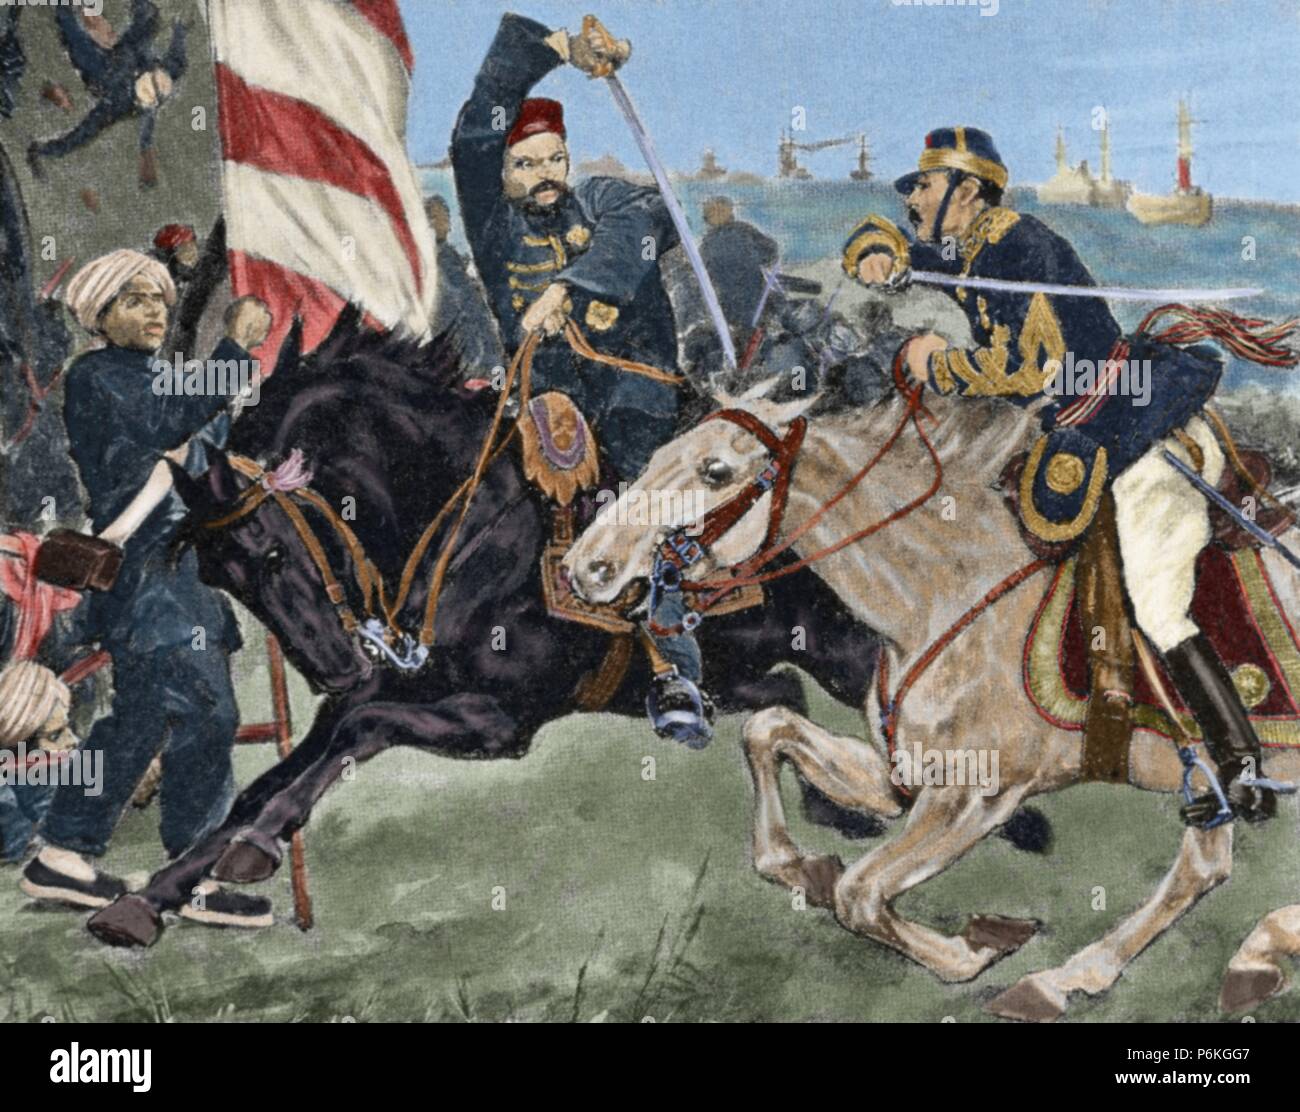 First Sino-Japanese War (1894-1895). Battle of Ping-Yang (September 15, 1894). The Japanese take a Chinese position. Engraving. Colored. Stock Photo